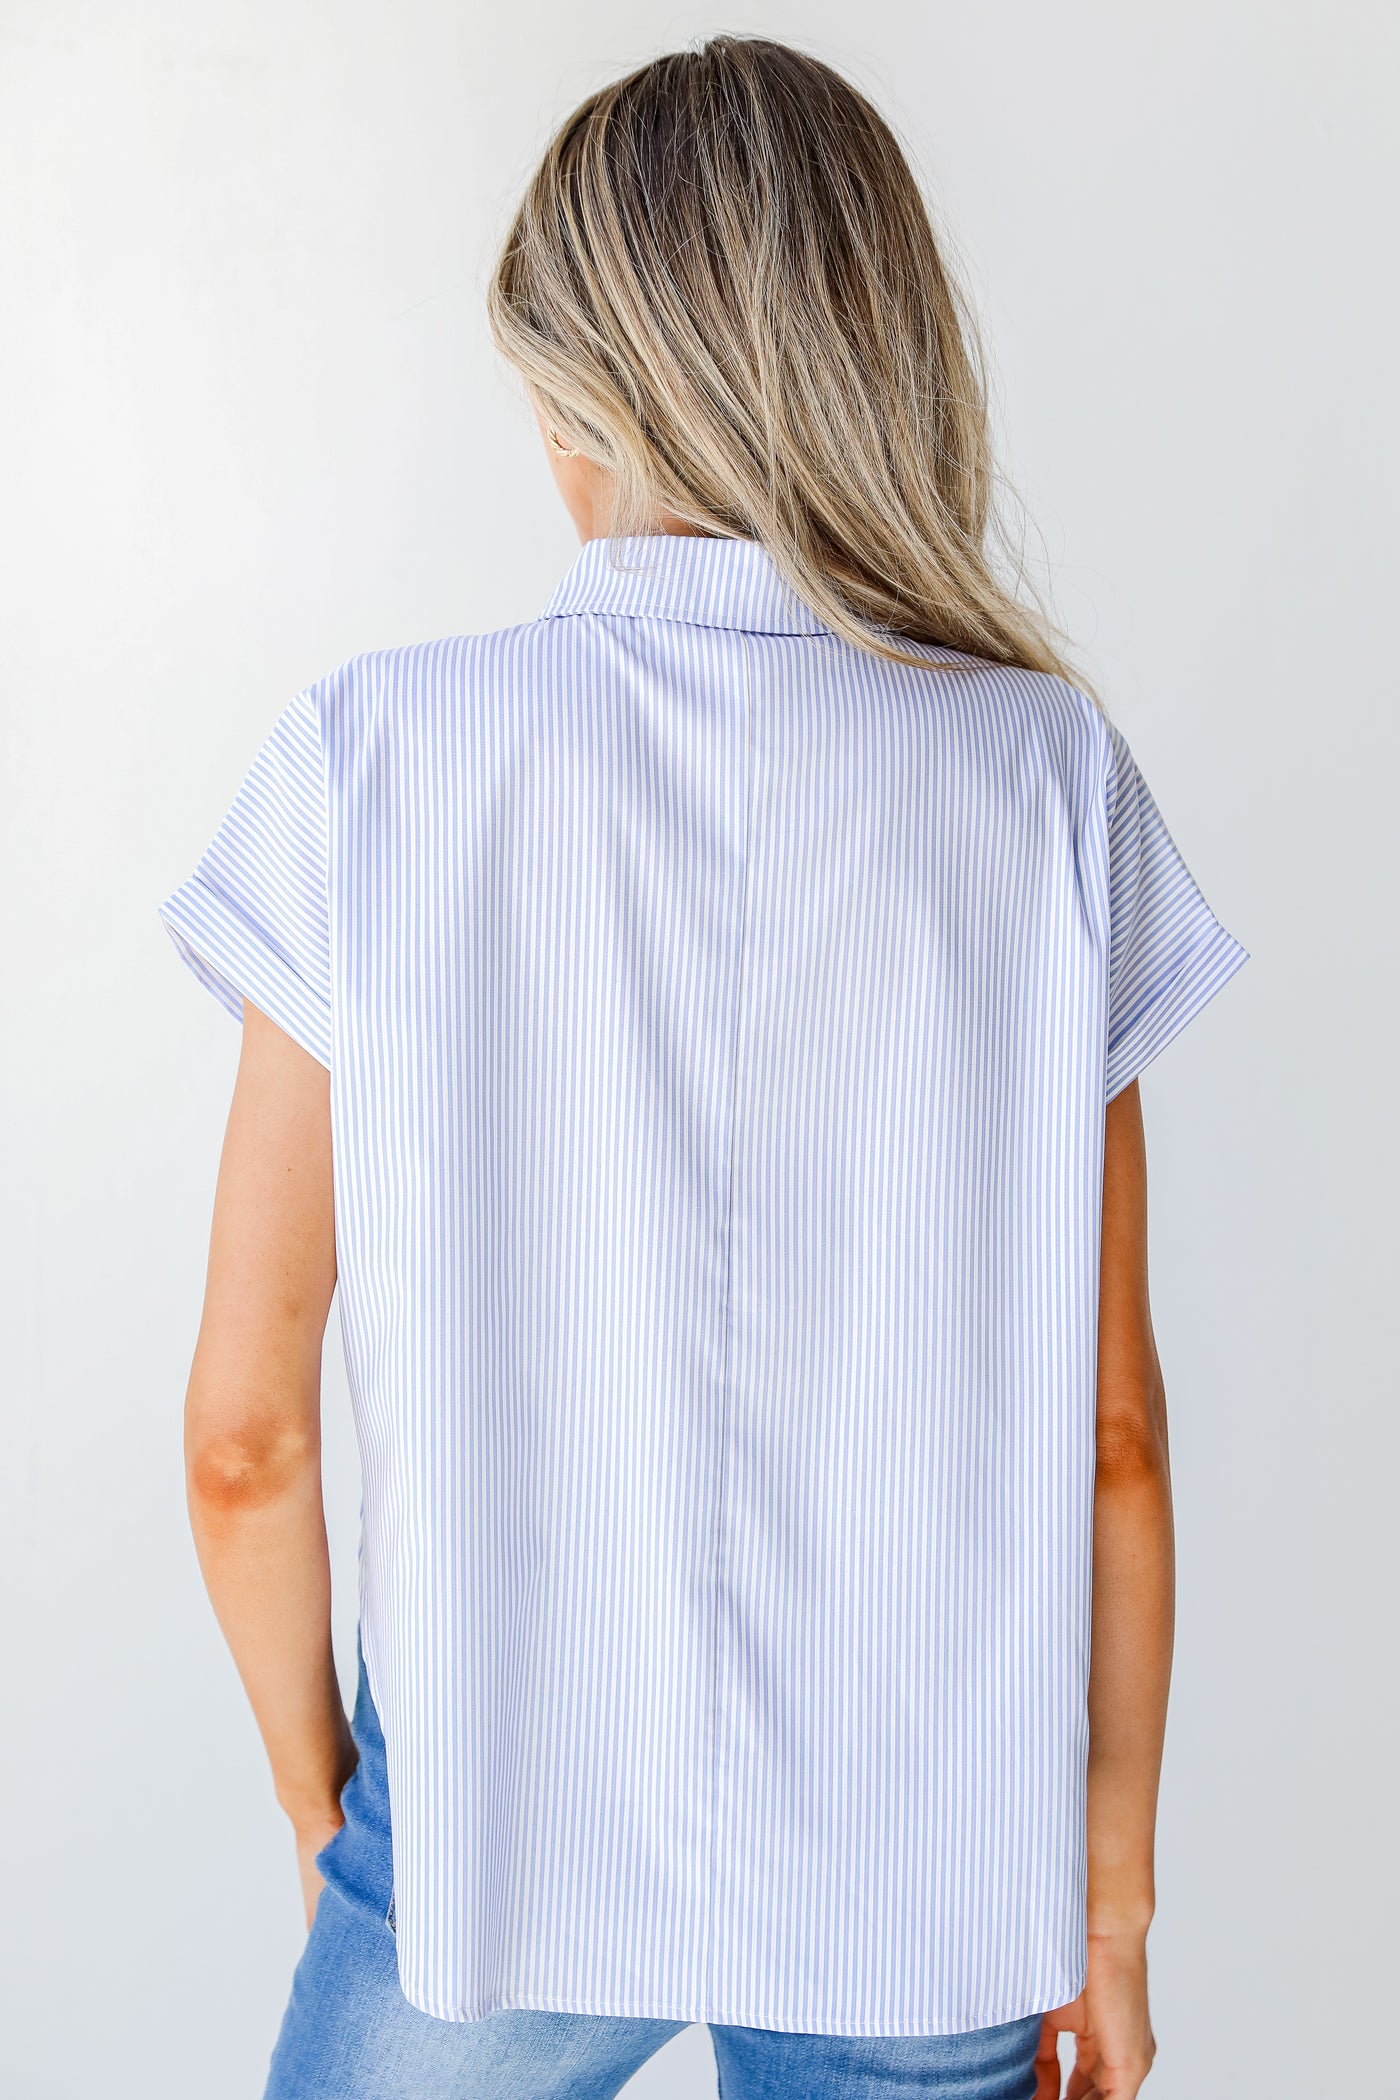 Striped Button-Up Blouse in light blue back view